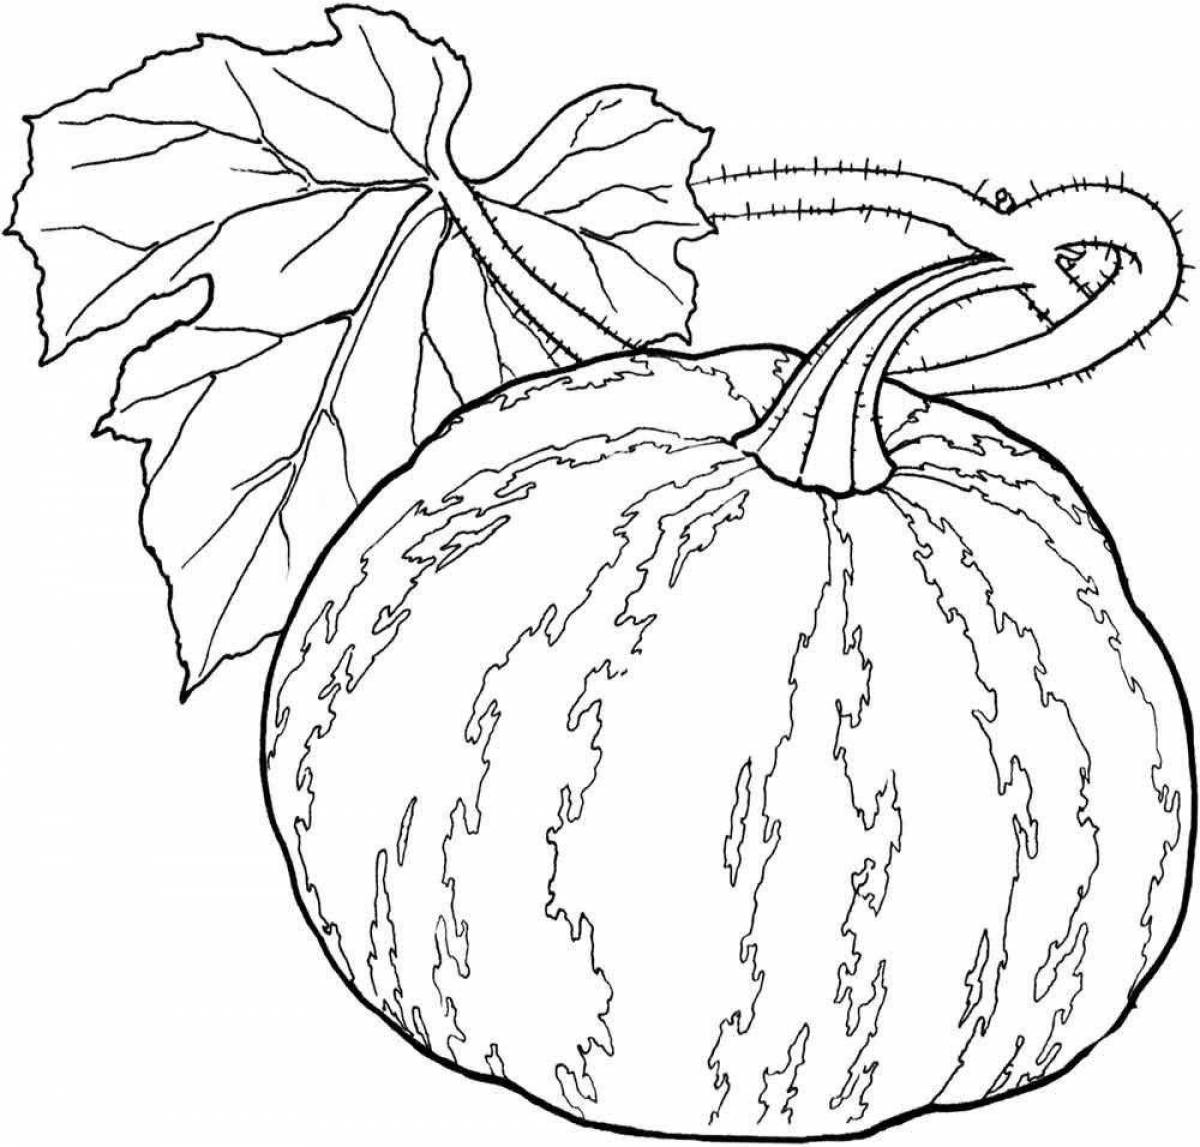 Exciting fruit coloring book for 6-7 year olds